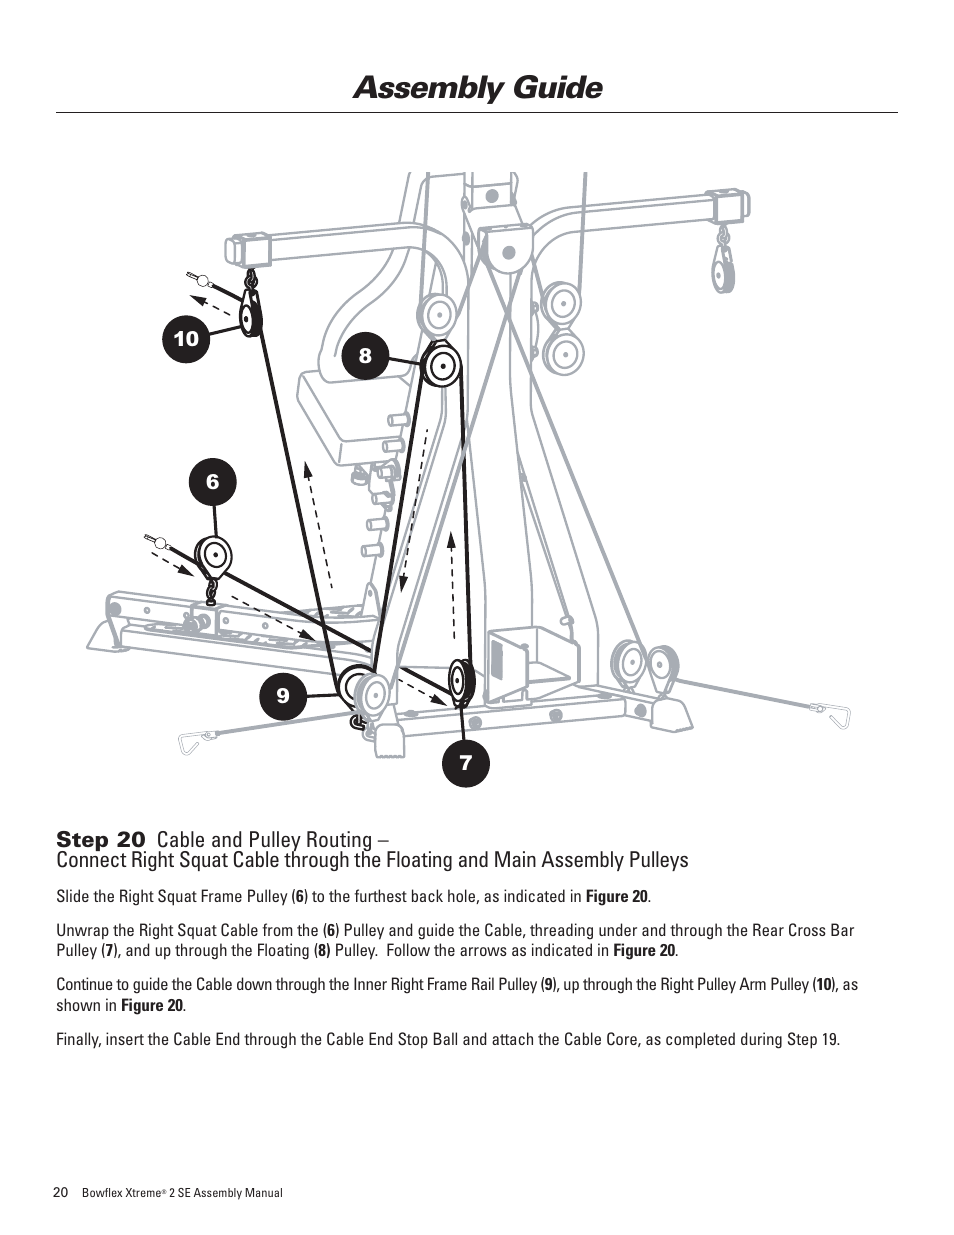 Assembly guide | Bowflex Xtreme 2 SE User Manual | Page 24 / 28 ...